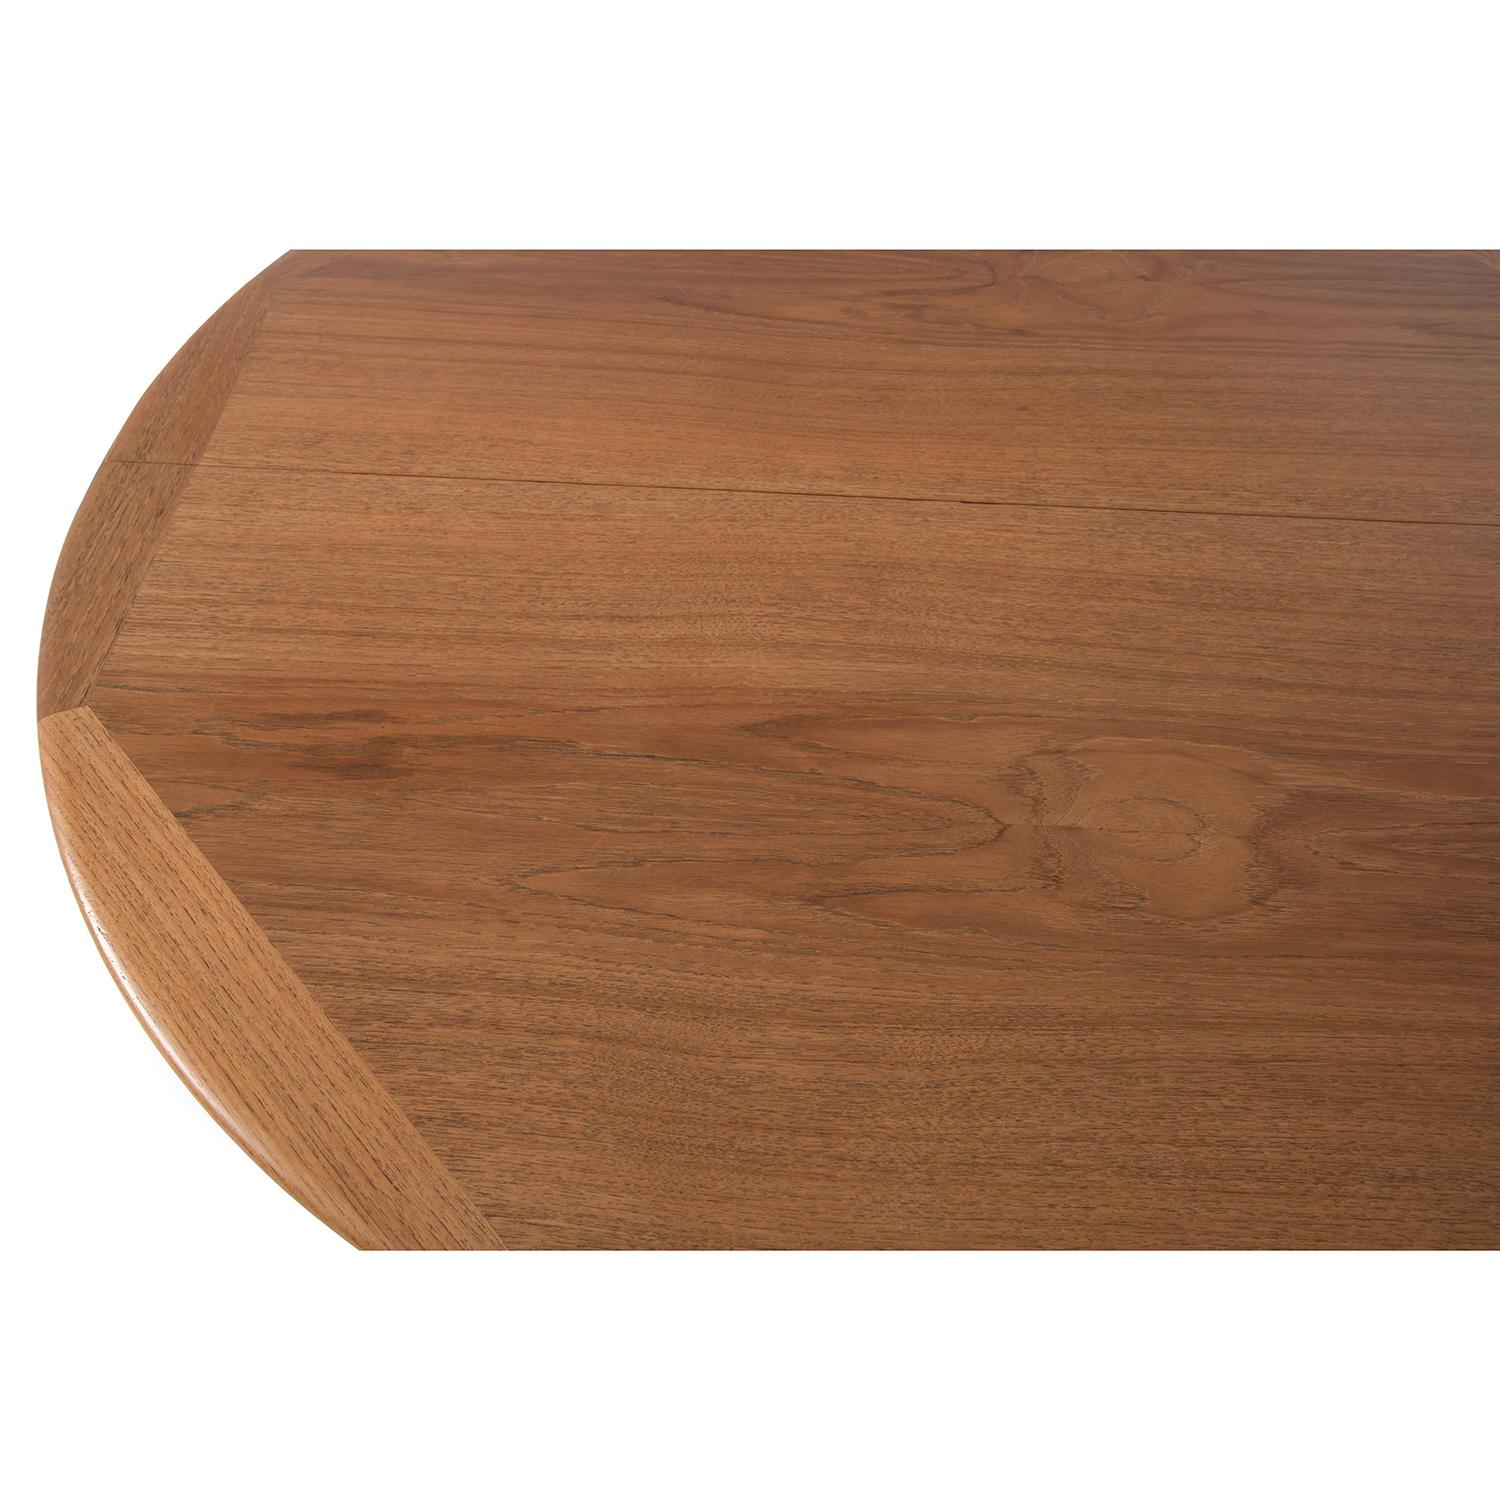 Oiled Danish Modern Round Teak Table with Edge Band Detail